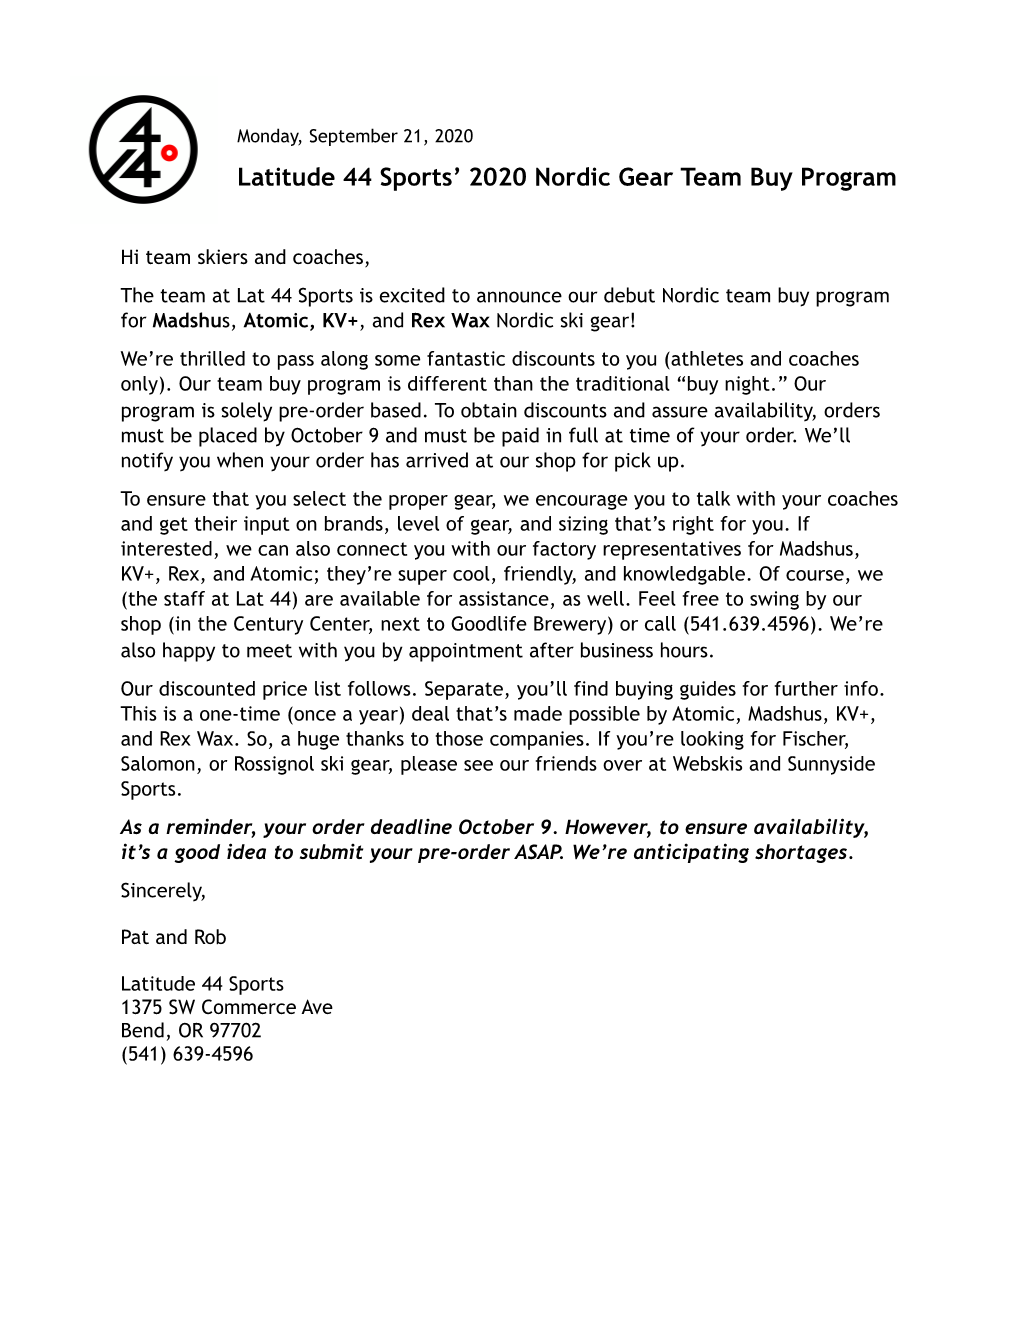 Nordic Gear Team Buy Program and Pricing